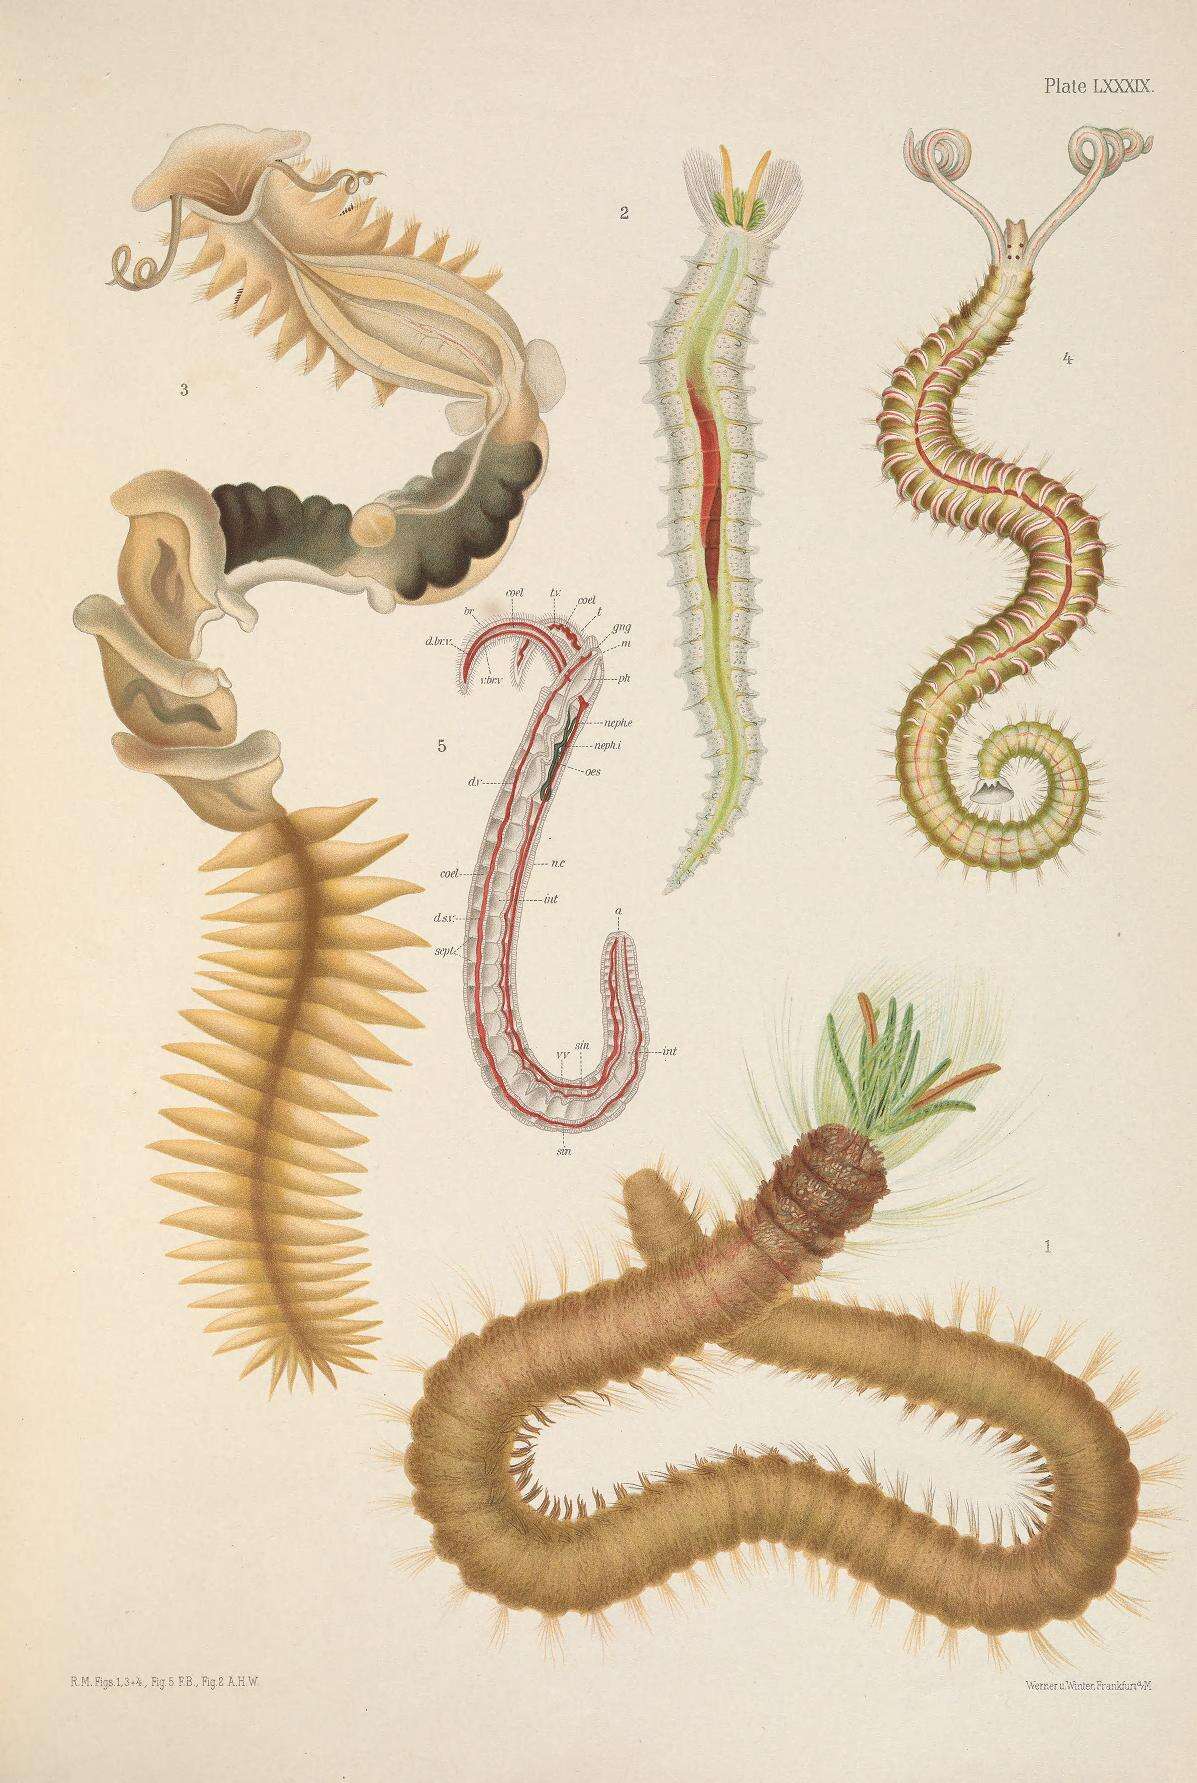 Image of Chaetopterus Cuvier 1830